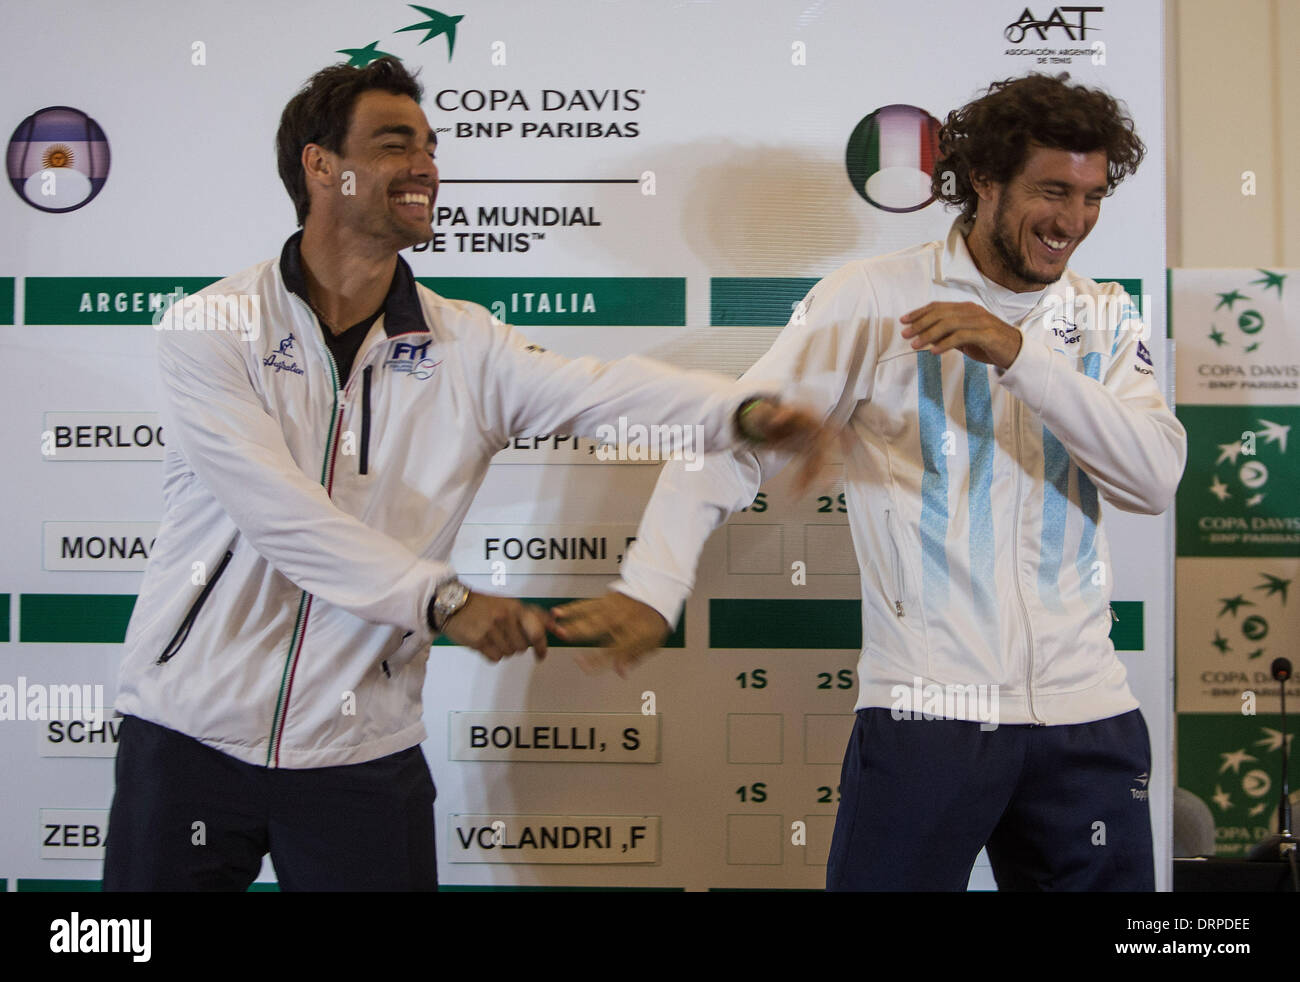 Mar Del Plata, Argentina. 30th Jan, 2014. Argentina's Davis Cup single player, Juan Monaco (R) and Fabio Fognini (L) of Italy, joke while posing at the end of drawing for the game matches of the first round of the Davis Cup World Group 2014 between Argentina and Italy, in Mar del Plata, 404 km from Buenos Aires, capital of Argentina, on Jan. 30, 2014. Argentina and Italy will face each other in the first round of the Davis Cup World Group at Patinodromo Municipal Adalberto Lugea in Mar del Plata, from Jan. 31 to Feb. 2. Credit:  Martin Zabala/Xinhua/Alamy Live News Stock Photo